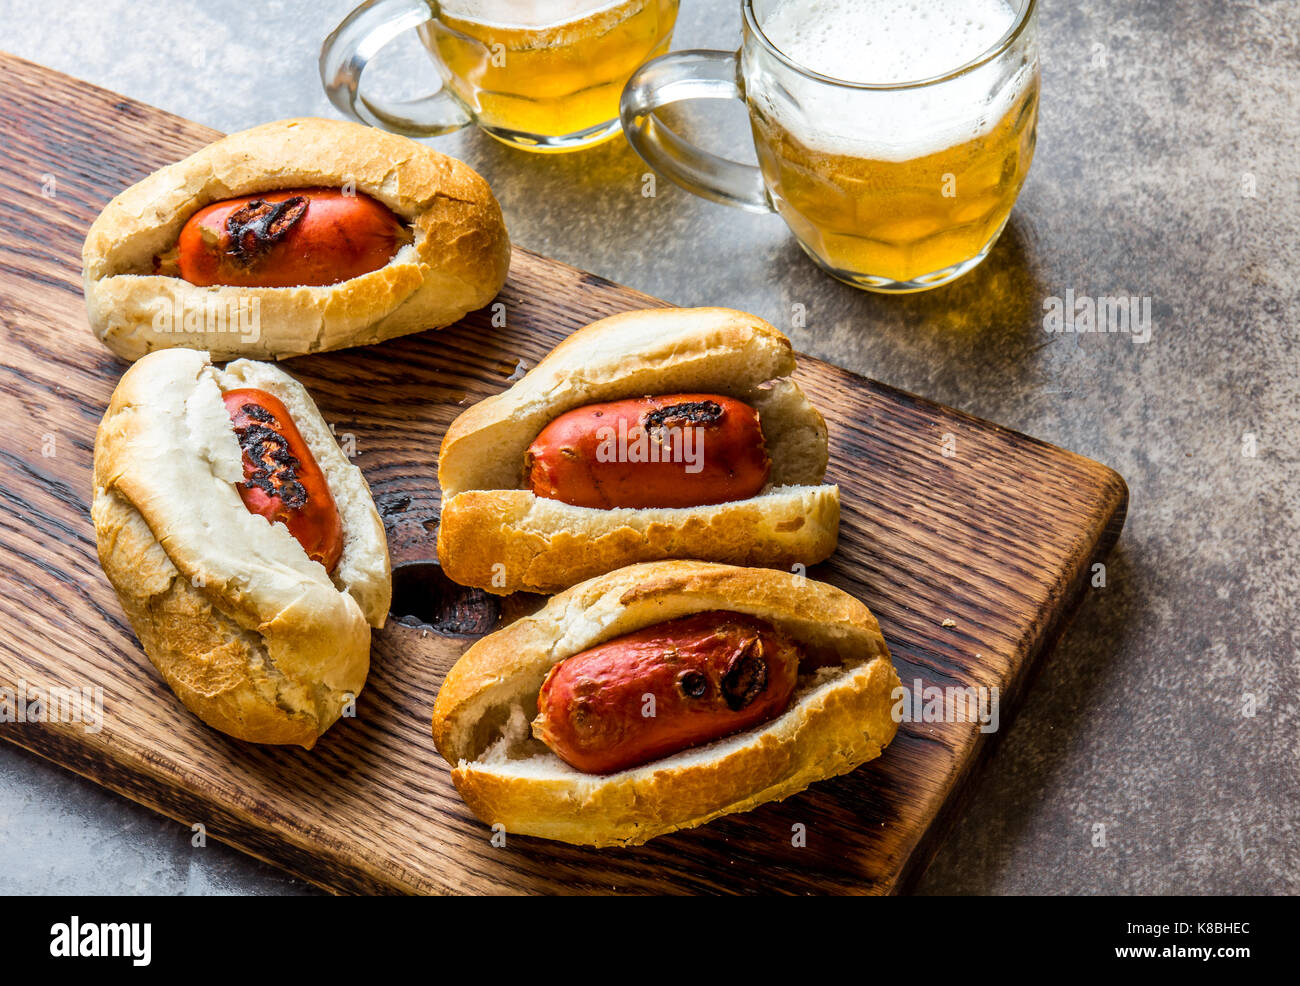 Choripan. Latin American Argentine and chilean food. Chorizo sausages hot dogs served with beer, top view. Stock Photo